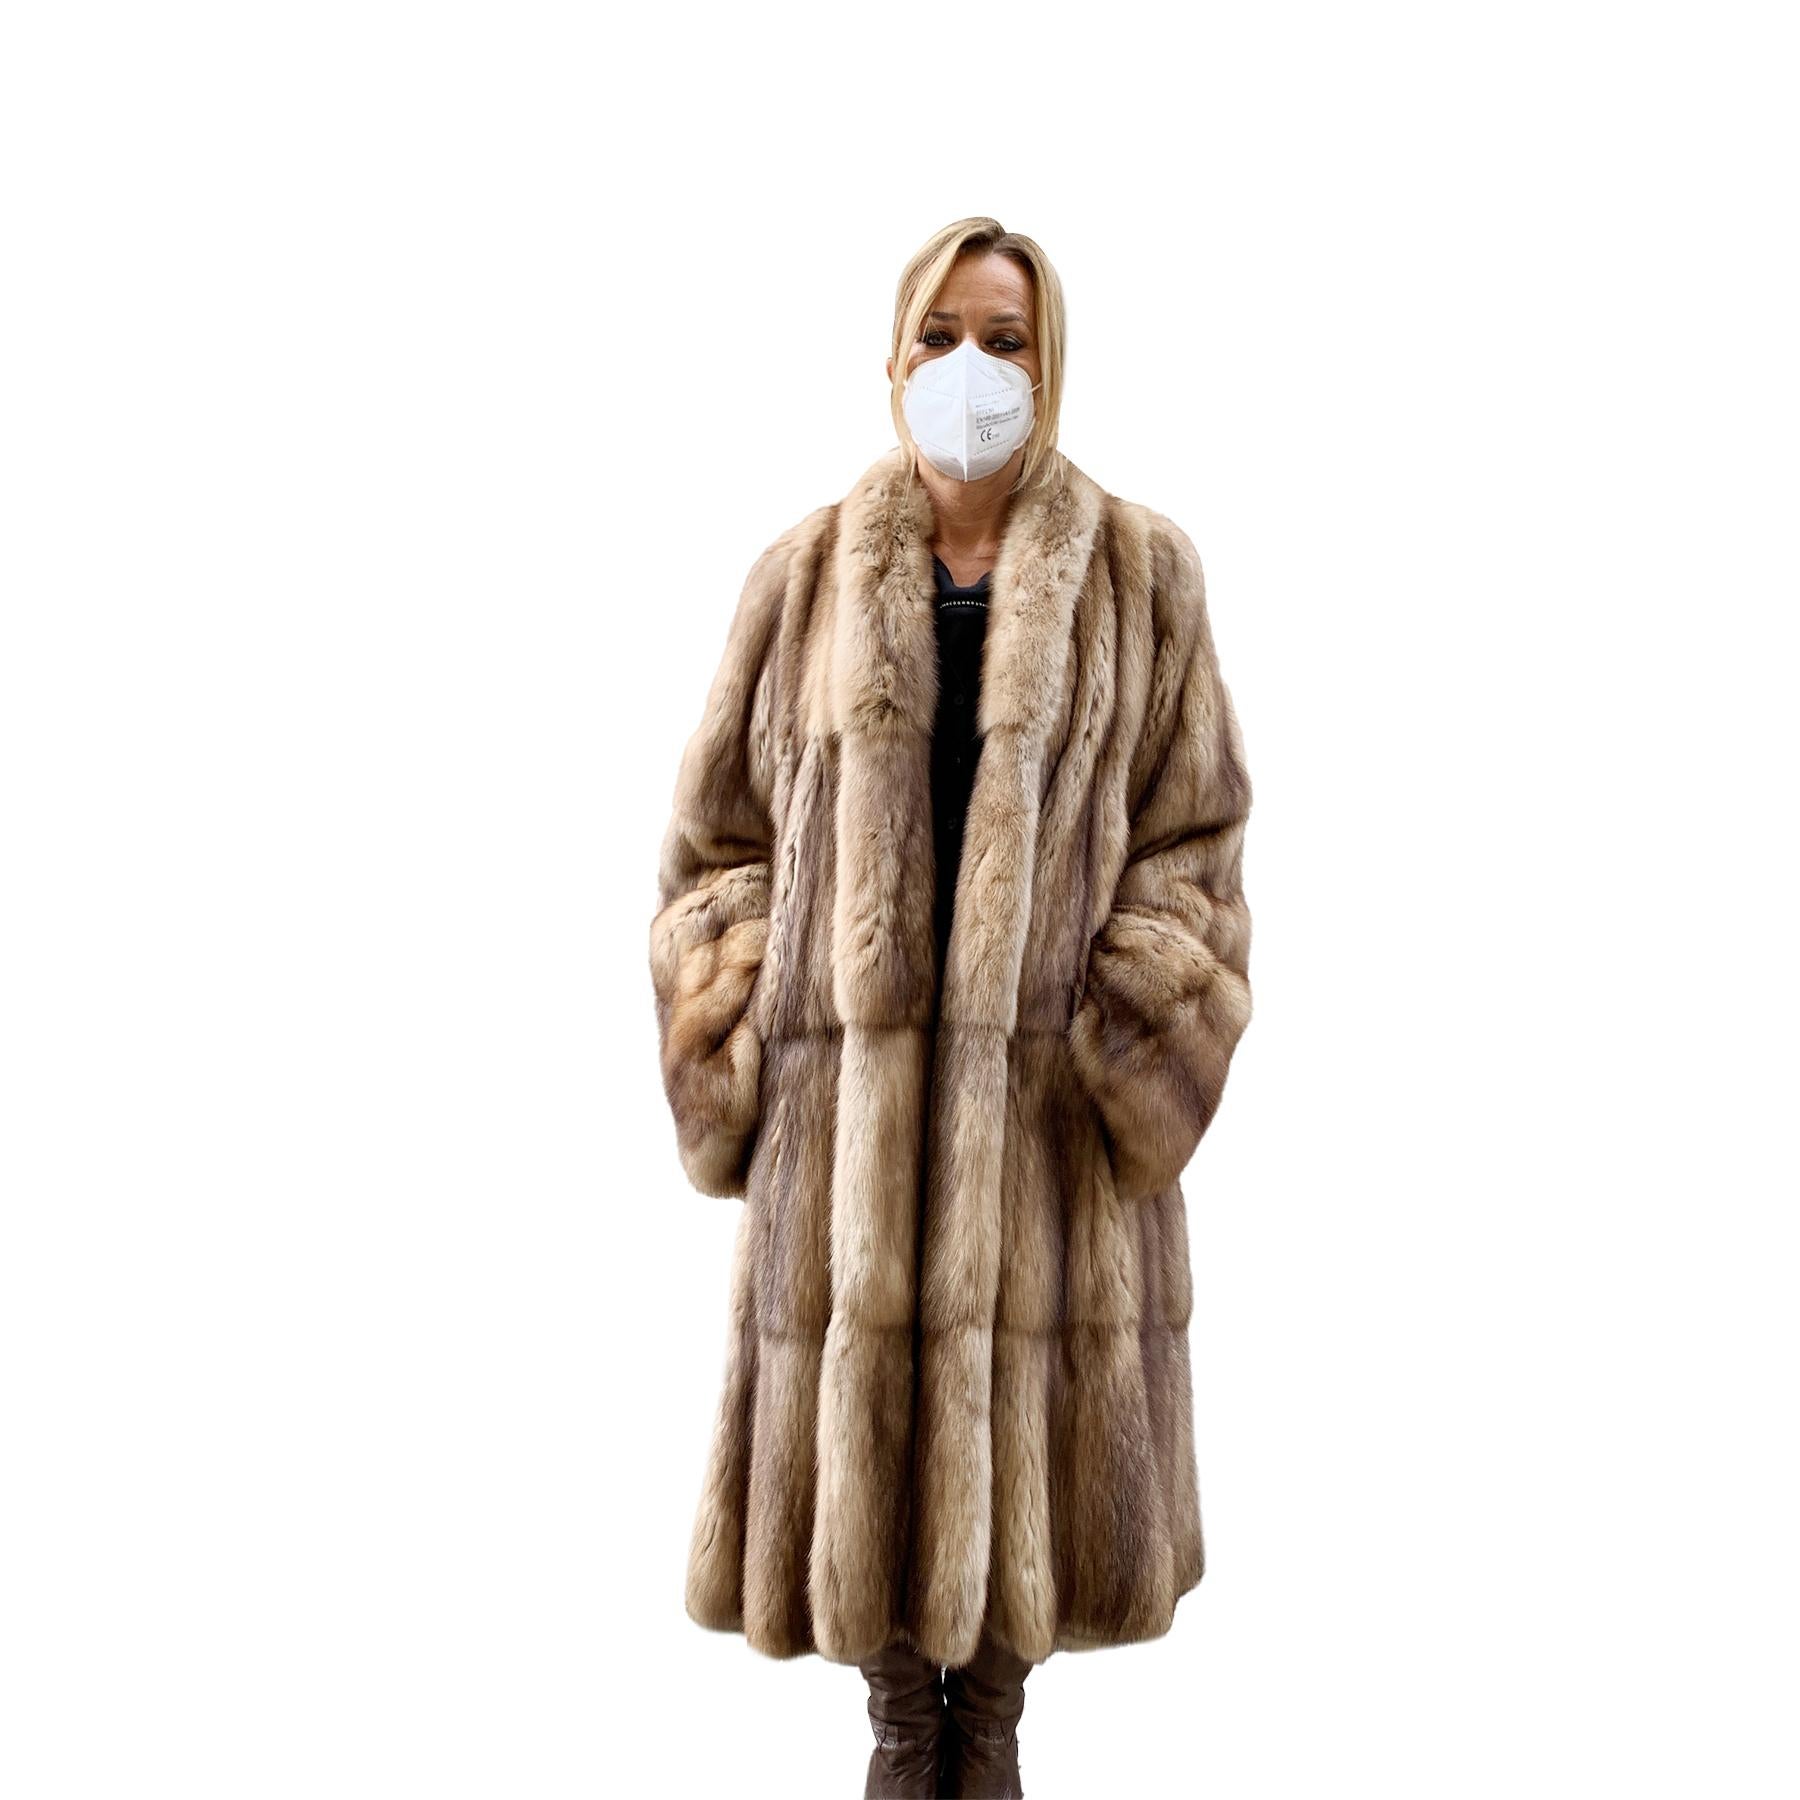 Gorgeous tan / beige tone Royal Russian Sable Zibeline Fur long coat from the 1970s, signed DE CARLIS, Roma - one of the most important fur and cashmere retailers in Italy, at that time.

This beautiful item will come with a certificate of